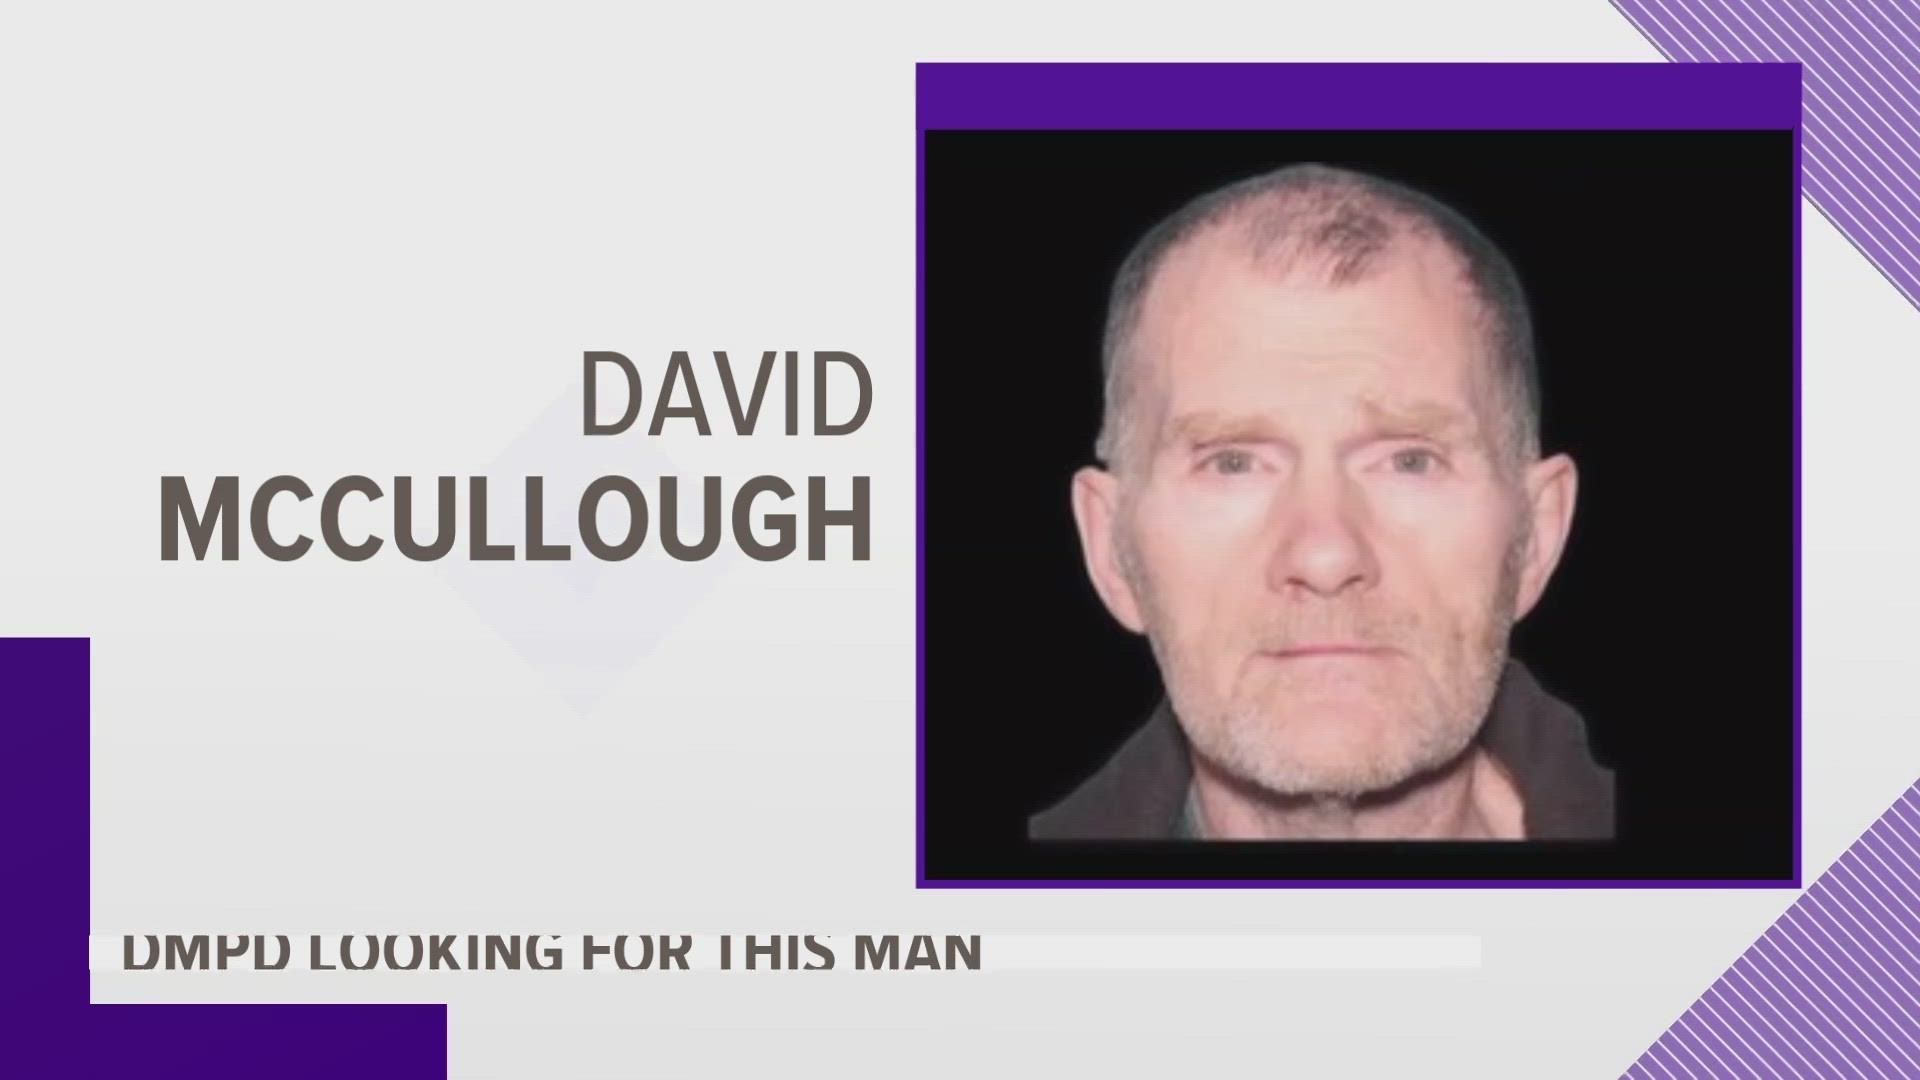 David McCullough was last seen Thursday wearing jeans, a tan-colored vest and a sun hat near his home on the 1500 block of 61st Street.